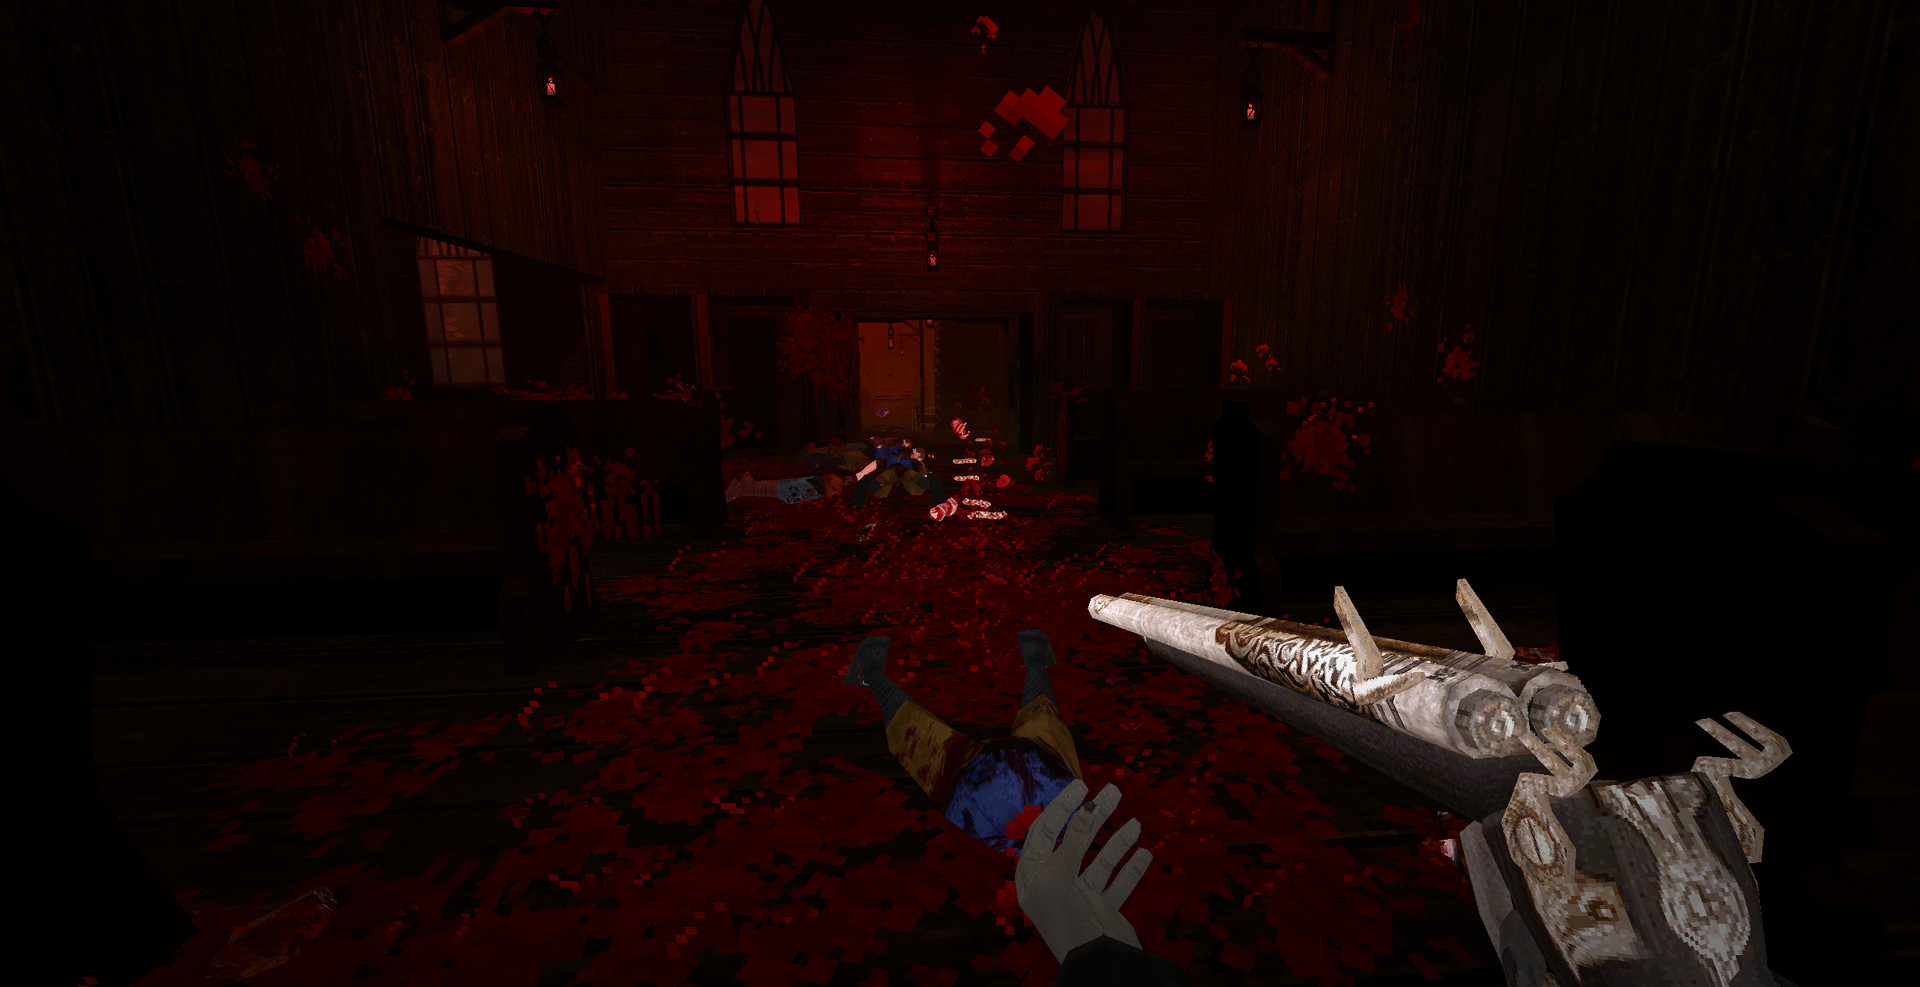 gameplay view reloading double barreled shotgun with church floor and pews covered in blood